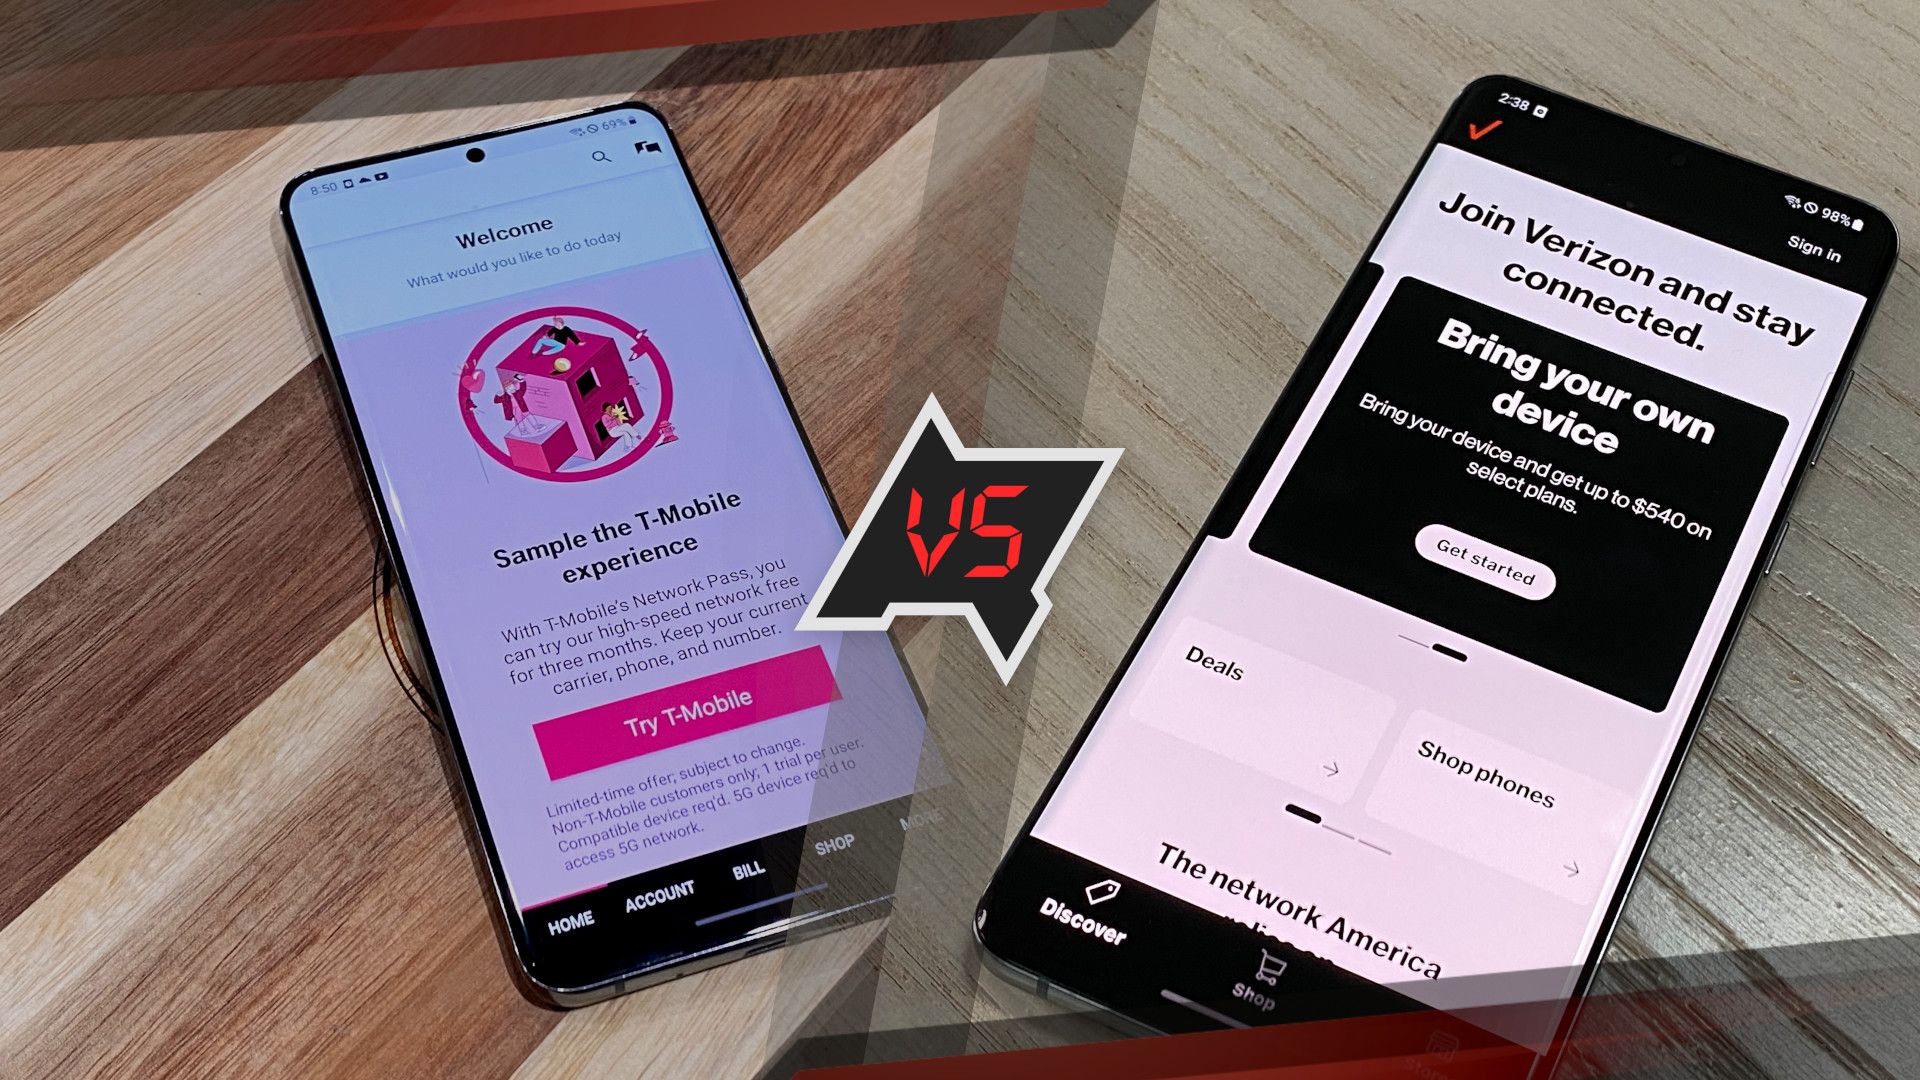 T-Mobile vs. Verizon: Which carrier is the better value?